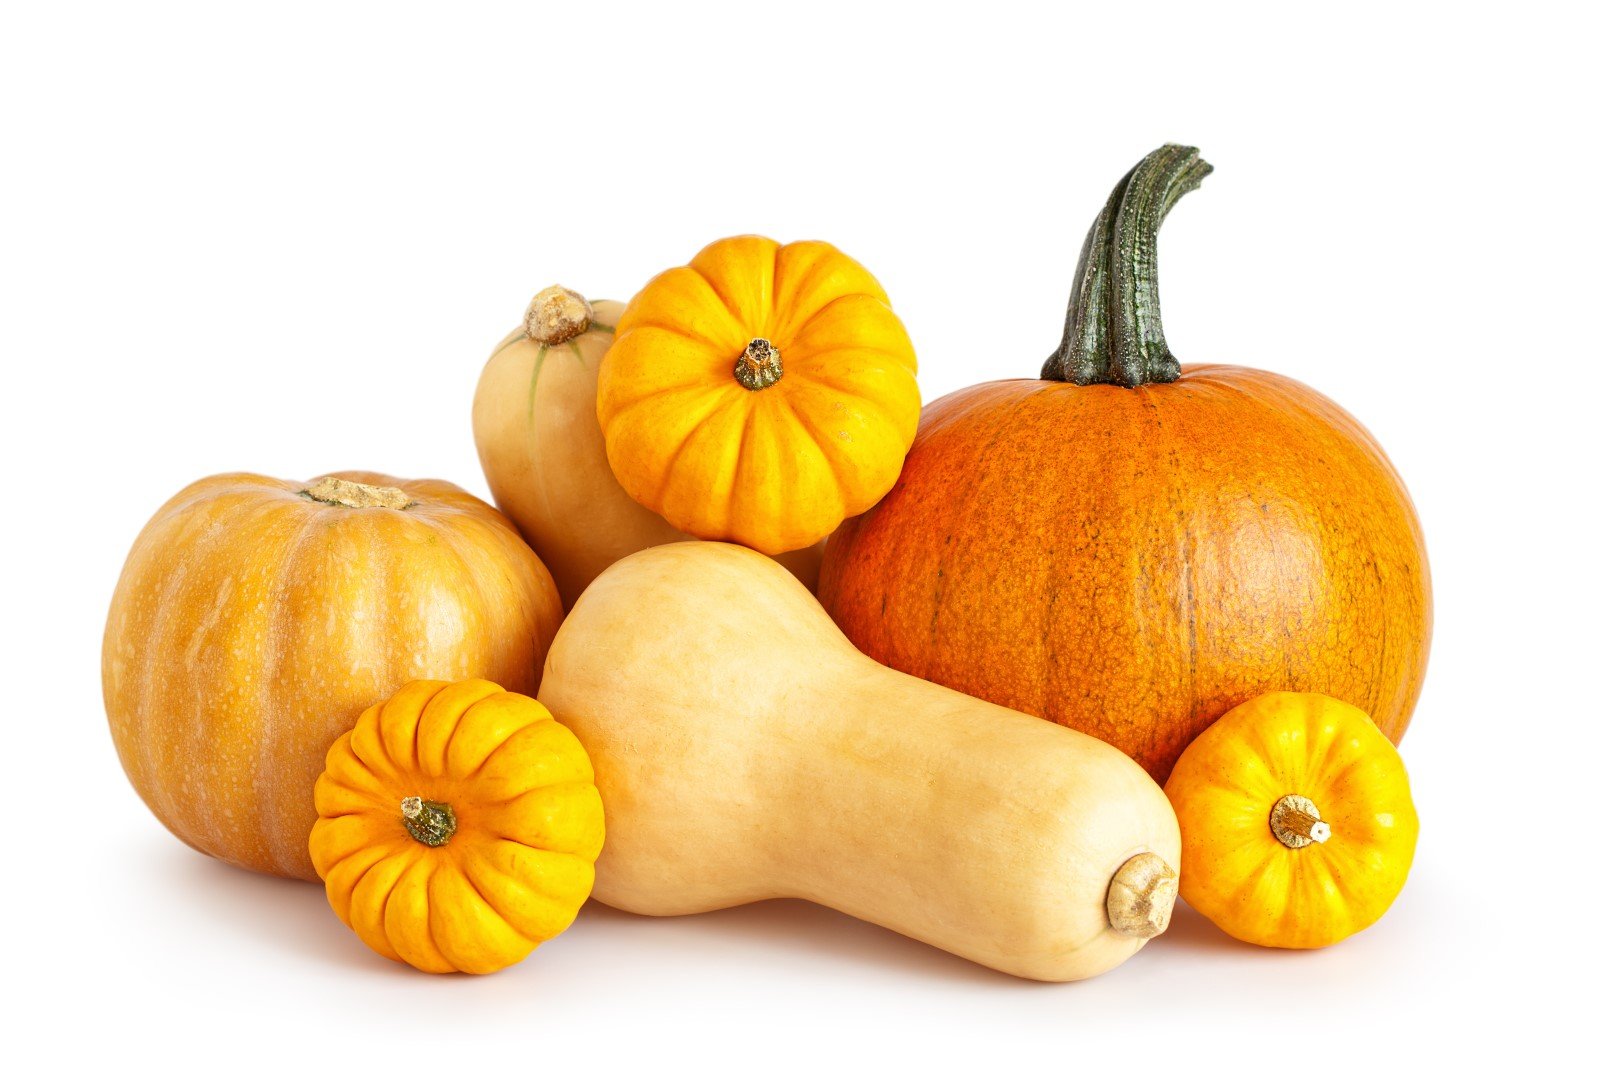 A photo of a large pumpkin with smaller pumpkins and butternut squash.